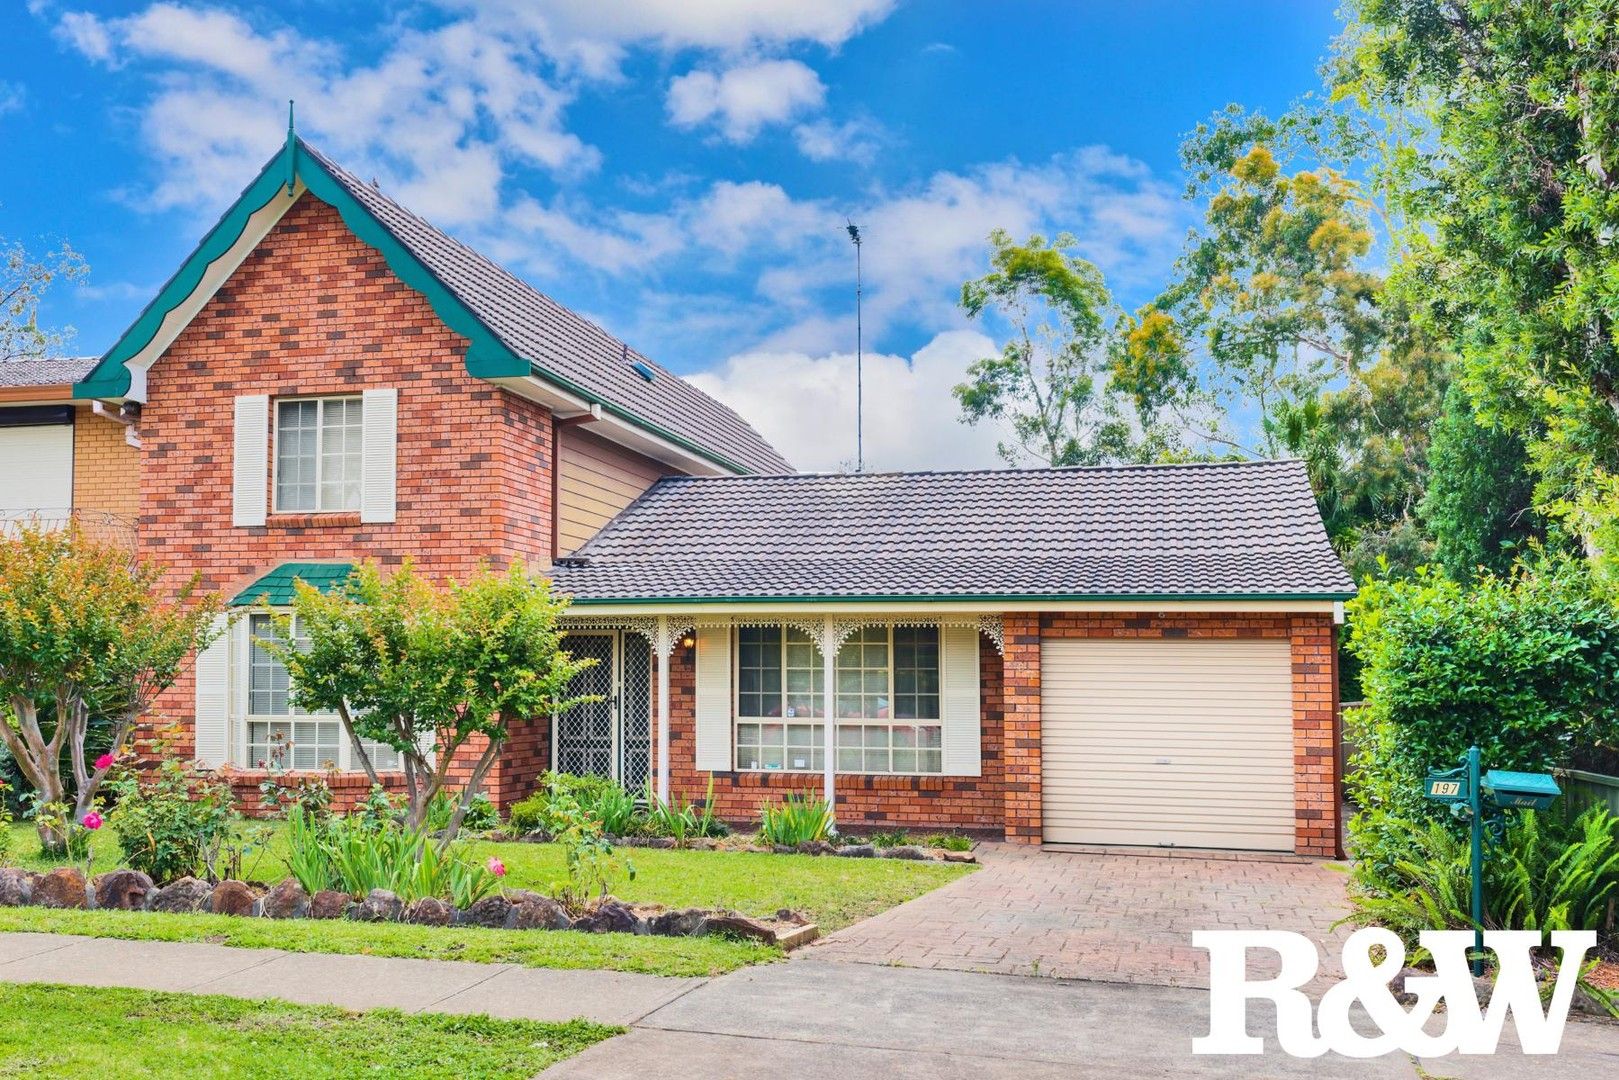 197 Rooty Hill Road North, Rooty Hill NSW 2766, Image 0